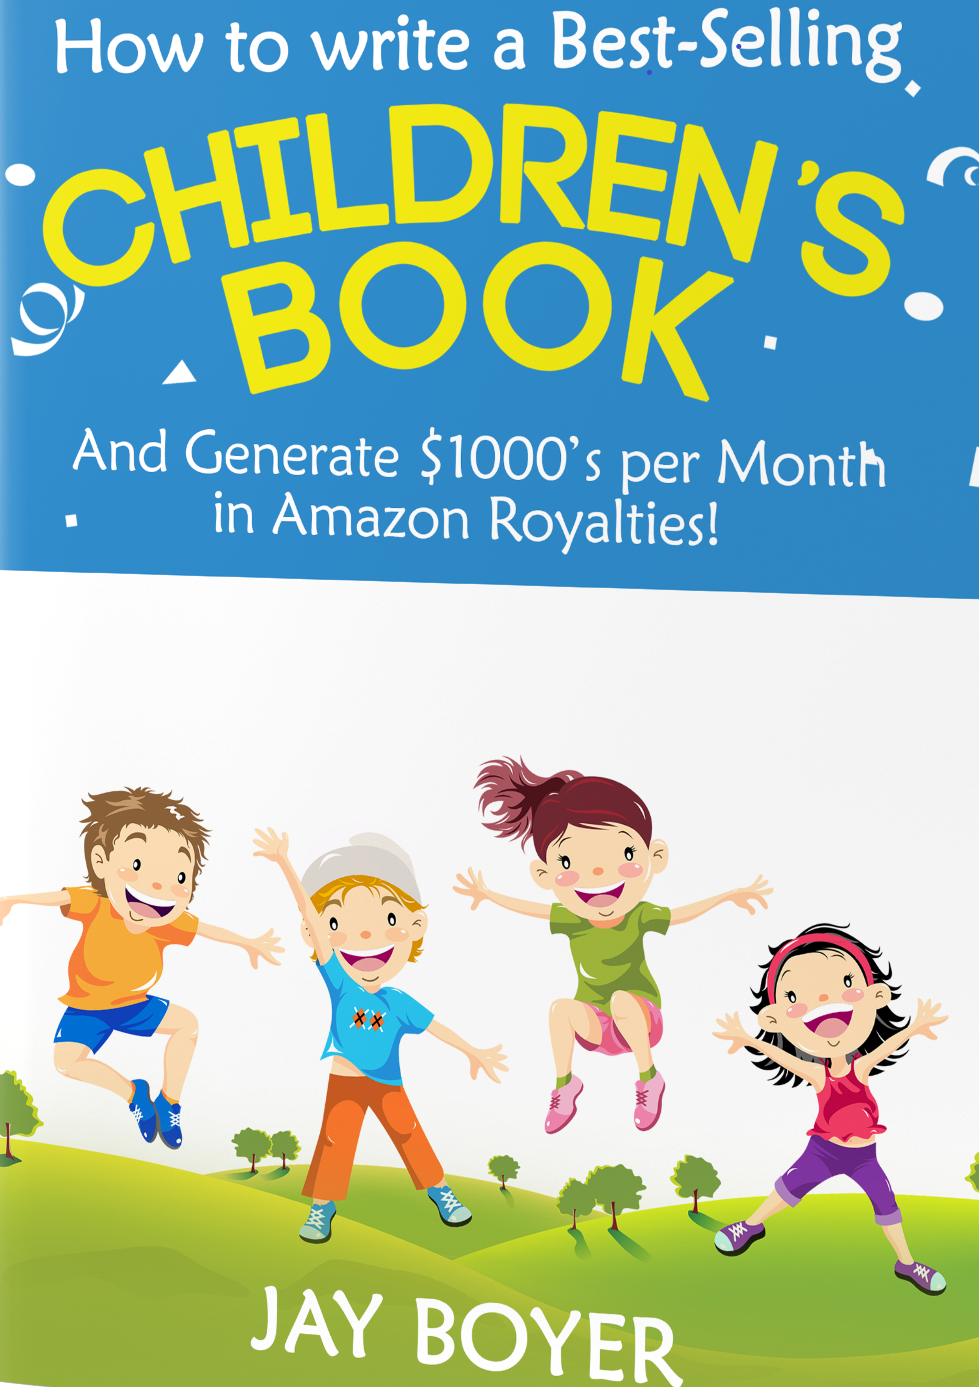 The Best Free Online Course To Make Money Selling Children’s Books On Amazon